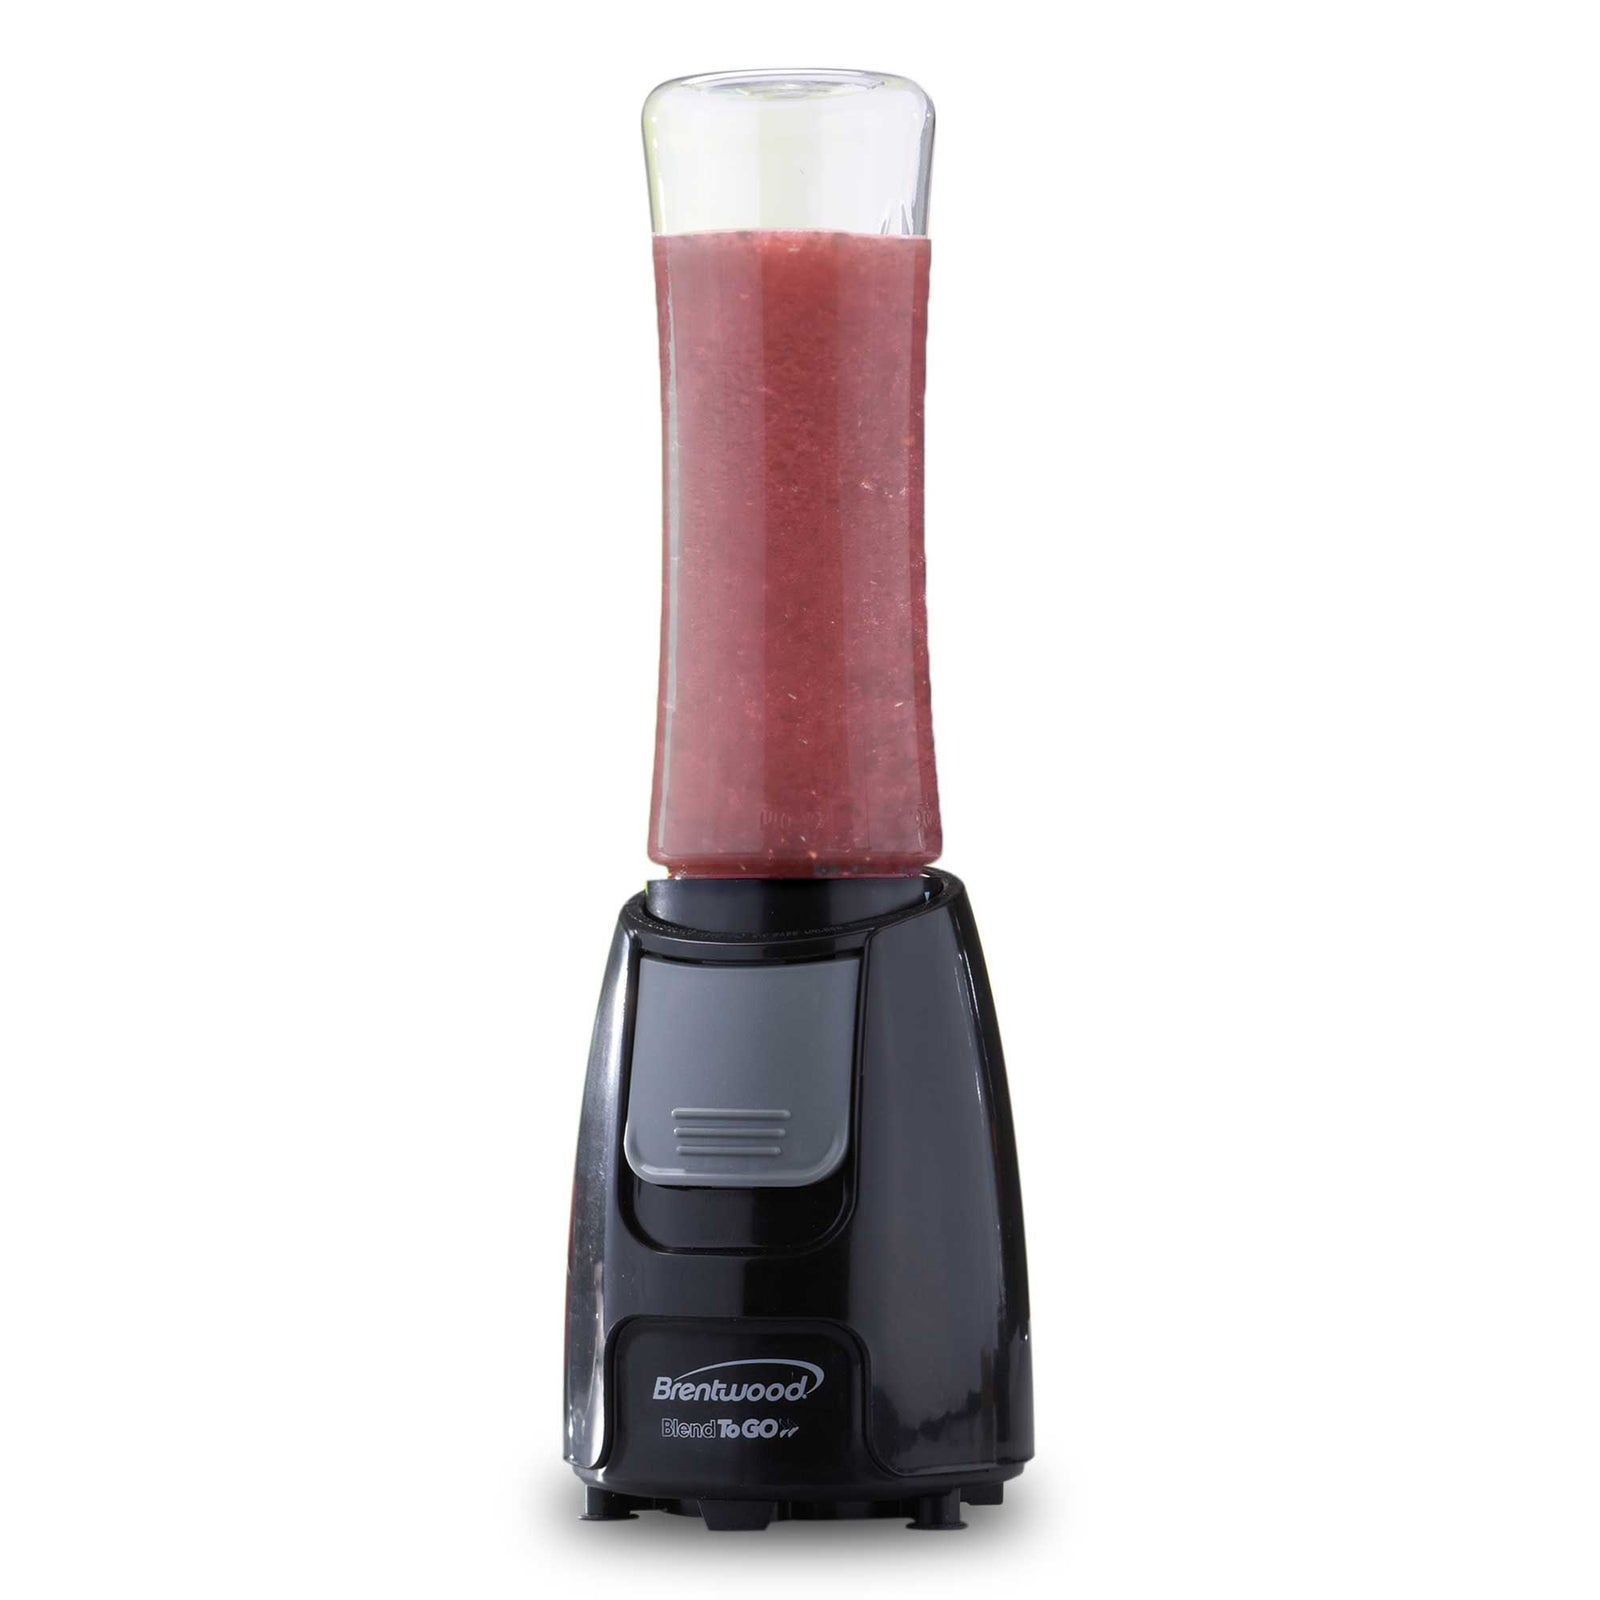 Brentwood RJB-100W 17oz Portable Battery Operated USB Glass Blender, W -  Brentwood Appliances